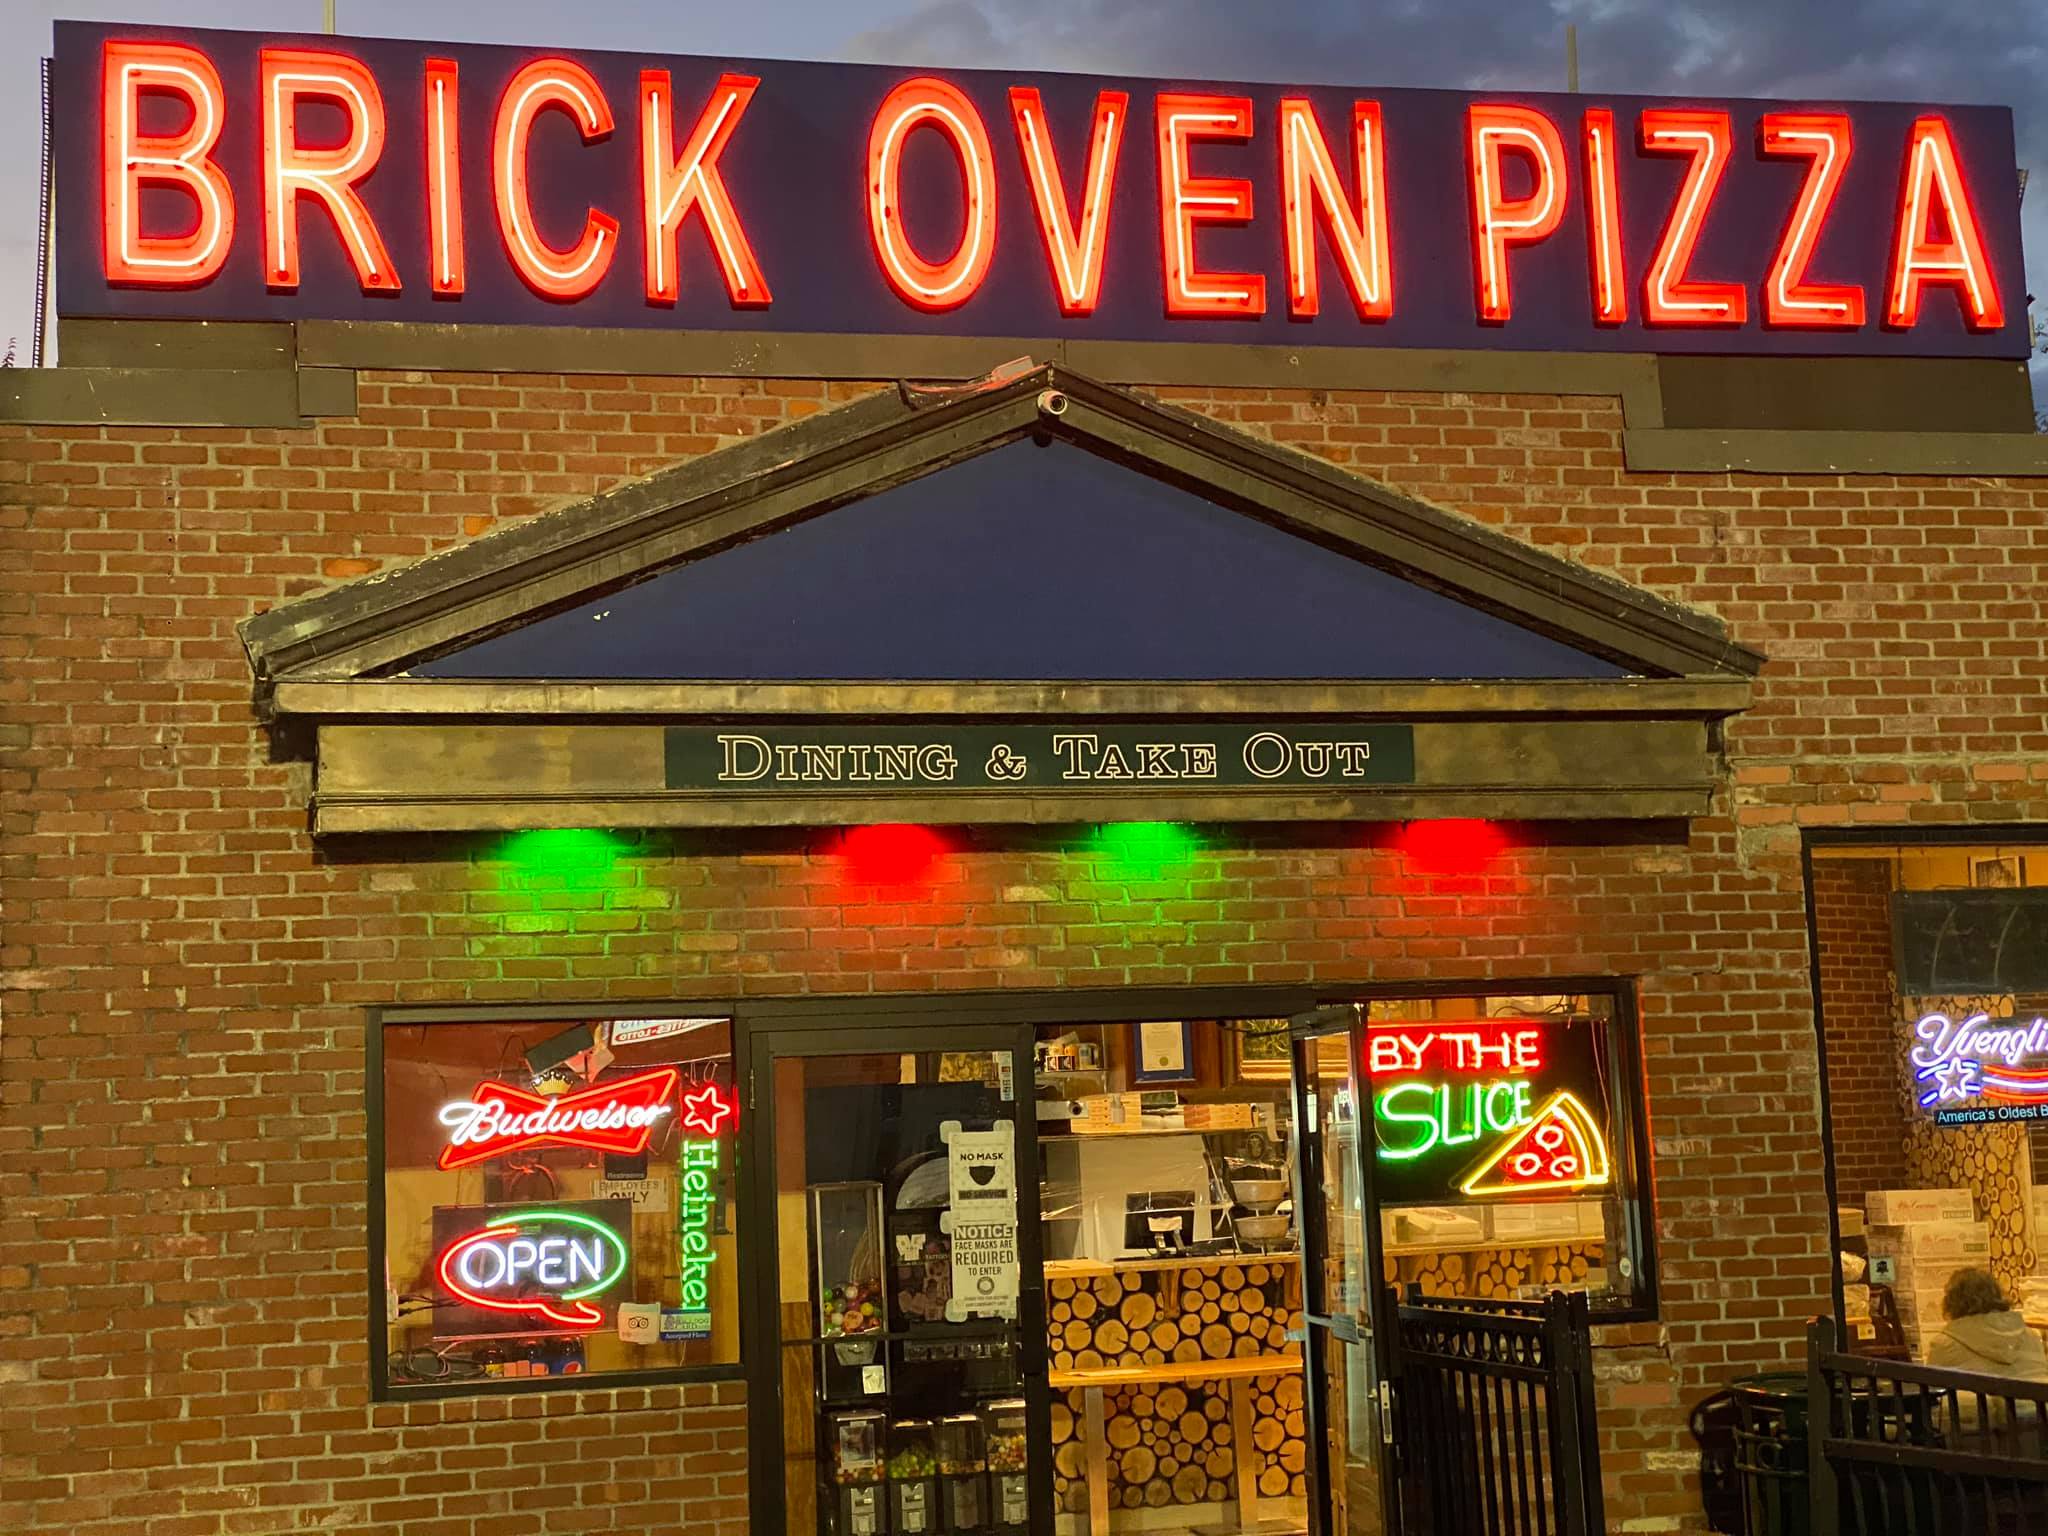 Pizza at the Brick Oven